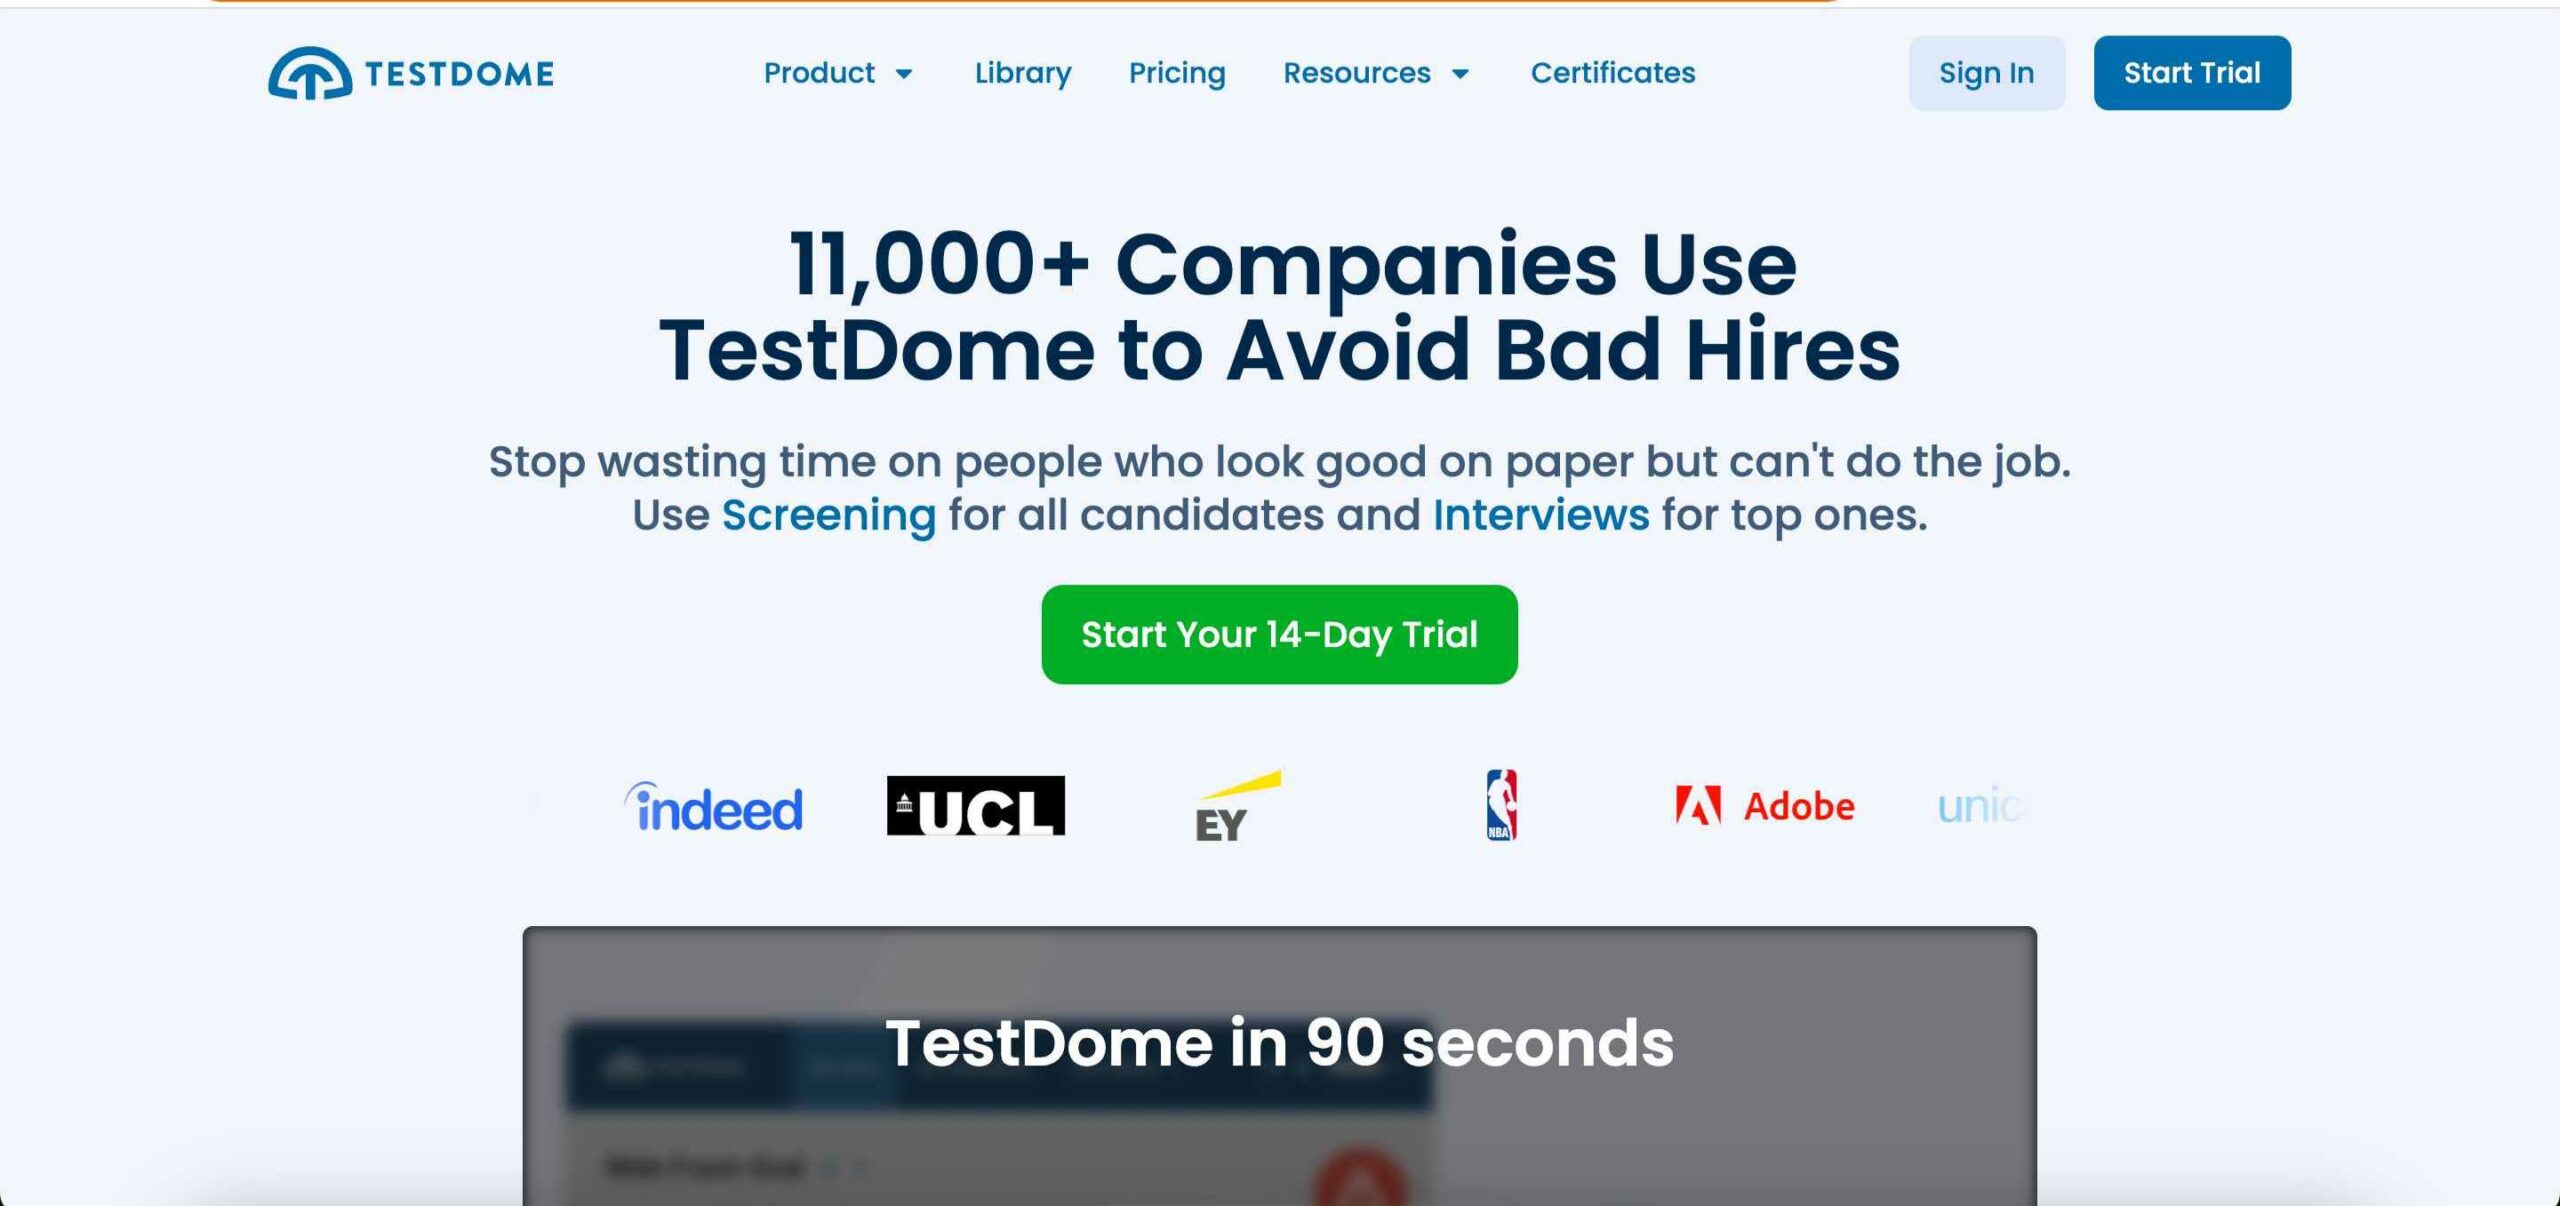 TestDome offers anti-cheating measures and easily customizable skils tests.